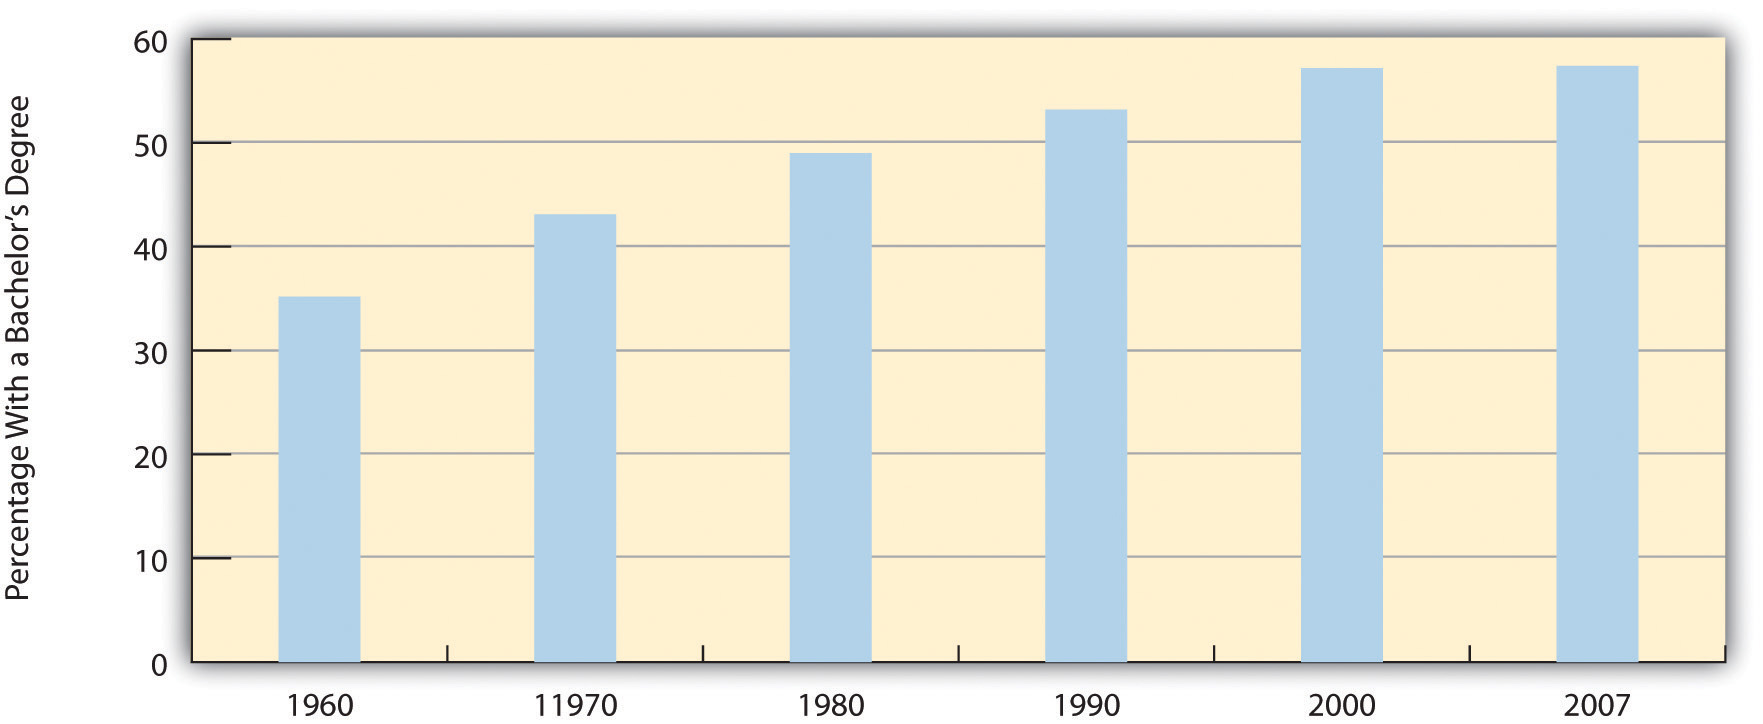 Percentage of All Bachelor's Degrees Received by Women, 1960-2007